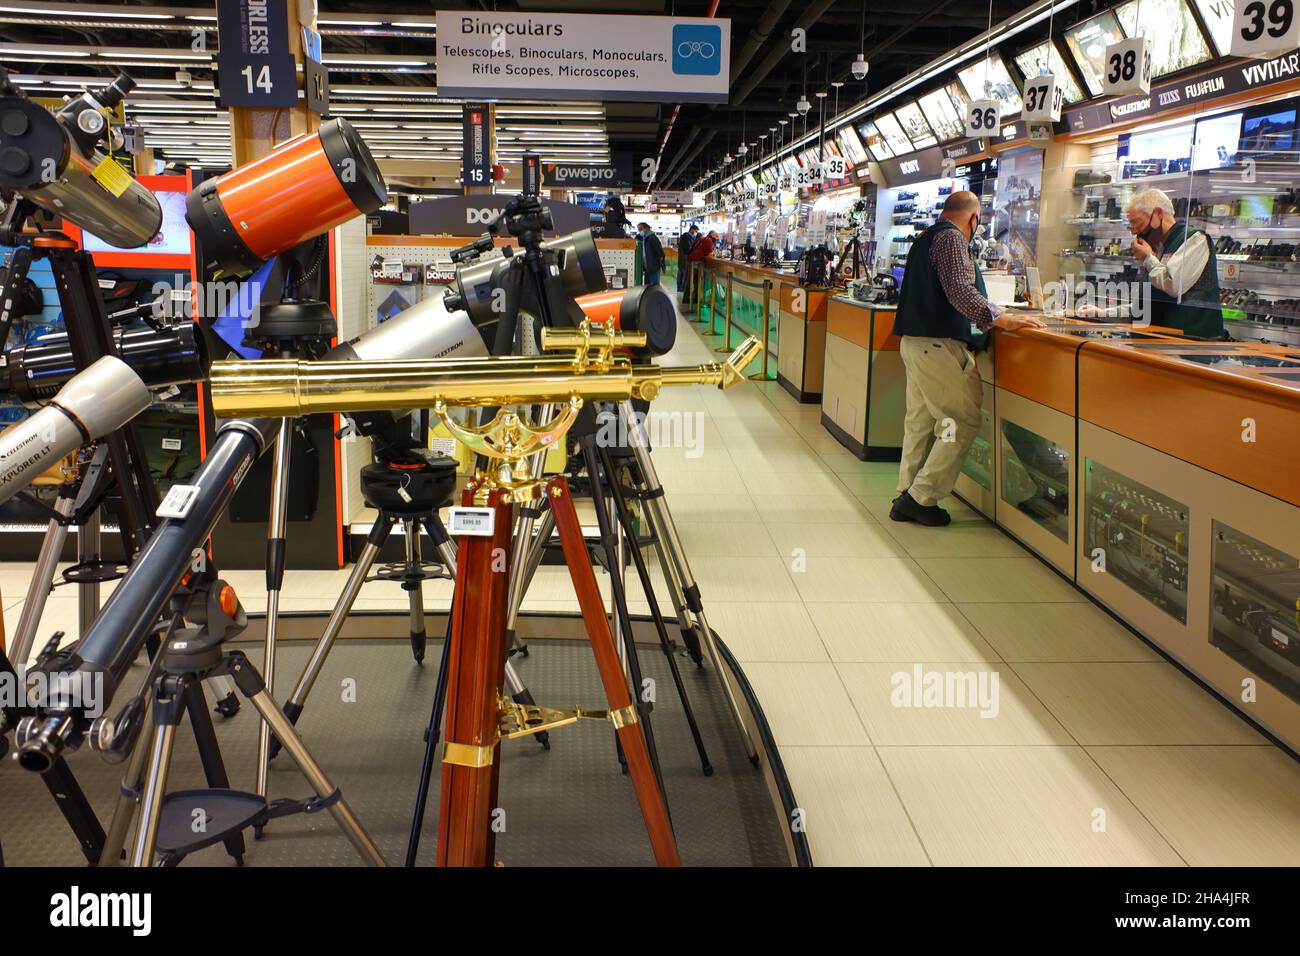 Telescopi display in Optical Instruments Department of B&H Photo Video - Electronics and Camera Store.Manhattan.New York City.New York.USA Foto Stock